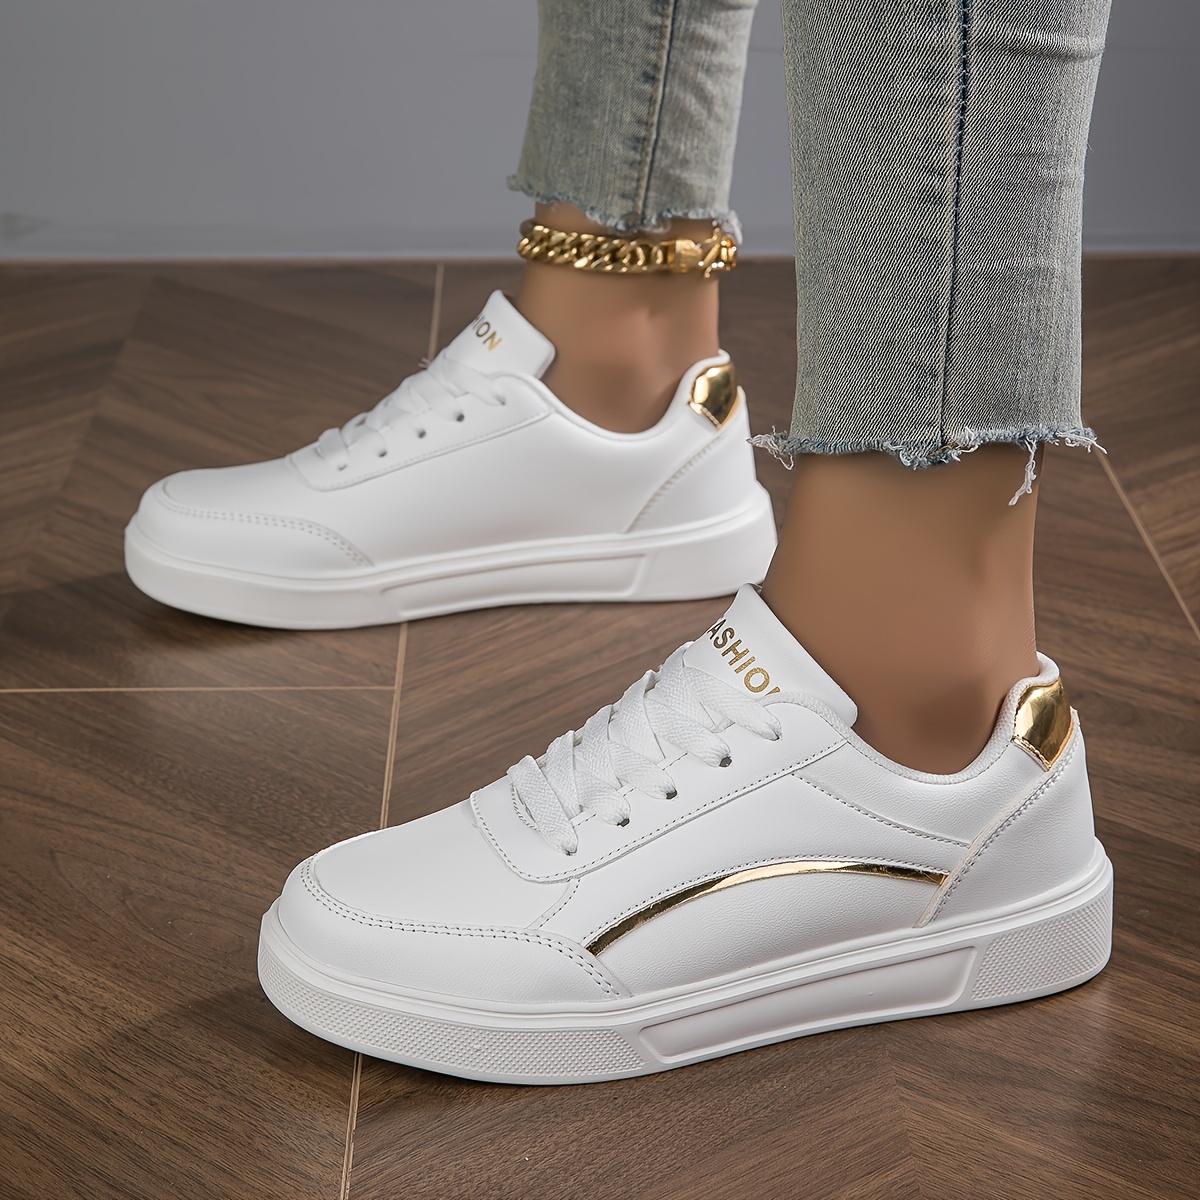 

Women's Fashion Casual White Shoes, Lightweight & Comfortable Skate Shoes, Versatile Low Top Sneakers